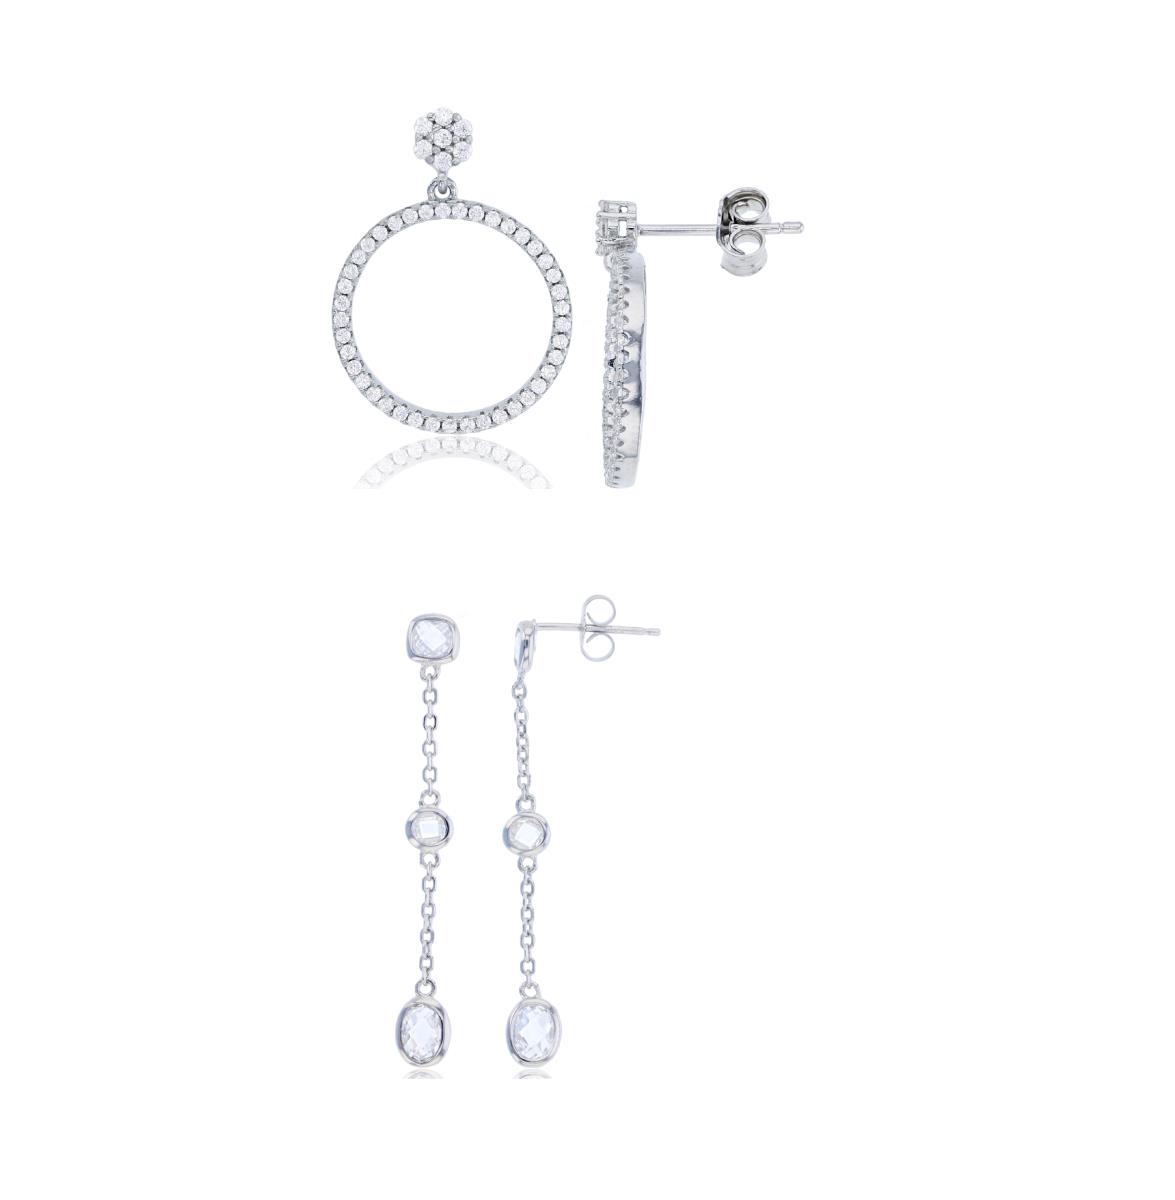 Sterling Silver Rhodium Micropave Cluster Open Circle & Rd/Oval/Cush Bezel Dangling Earring Set